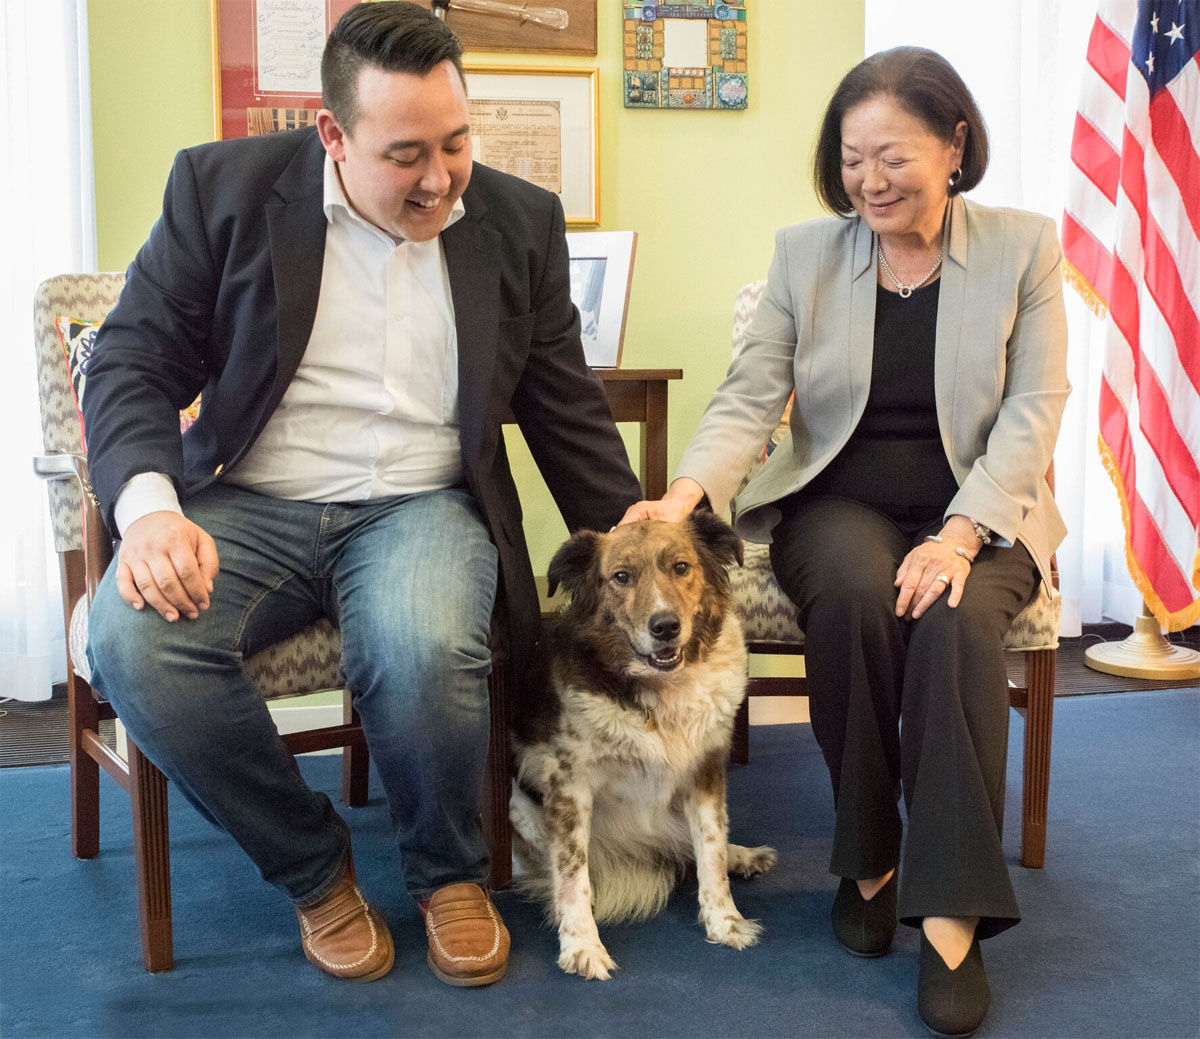 Sen. Mazie Hirono, D-Hawaii, and staffer Anthony’s dog, Beacon. Beacon was adopted a few years ago when he caught his dad’s eye while he was accompanying D.C. Council member Mary Cheh on a tour of the New York Avenue Adoption Center. (Courtesy Humane Rescue Alliance)